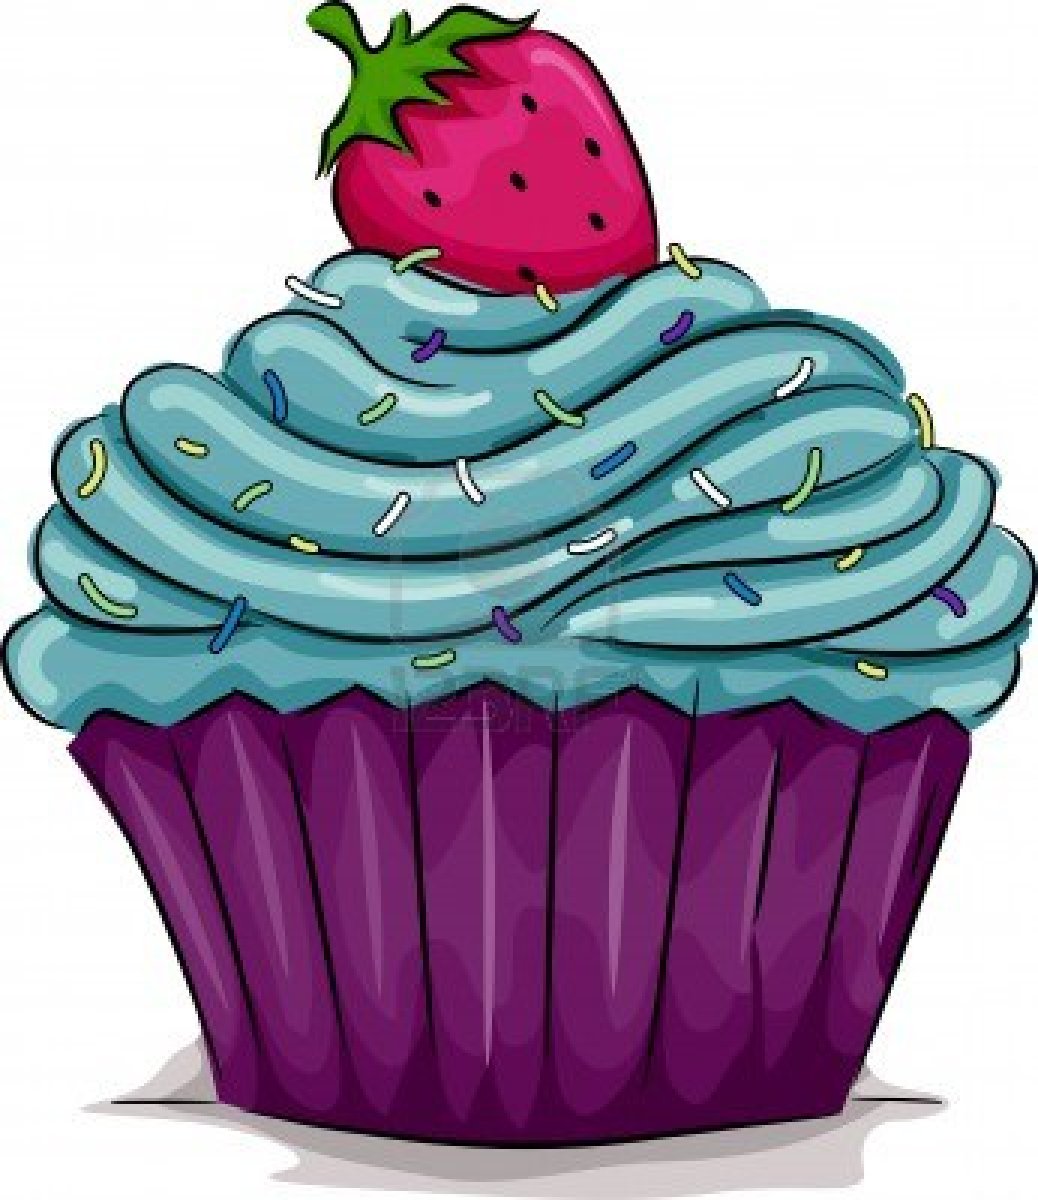 Illustration Of A Cupcake With A Strawberry On Top image - vector ...